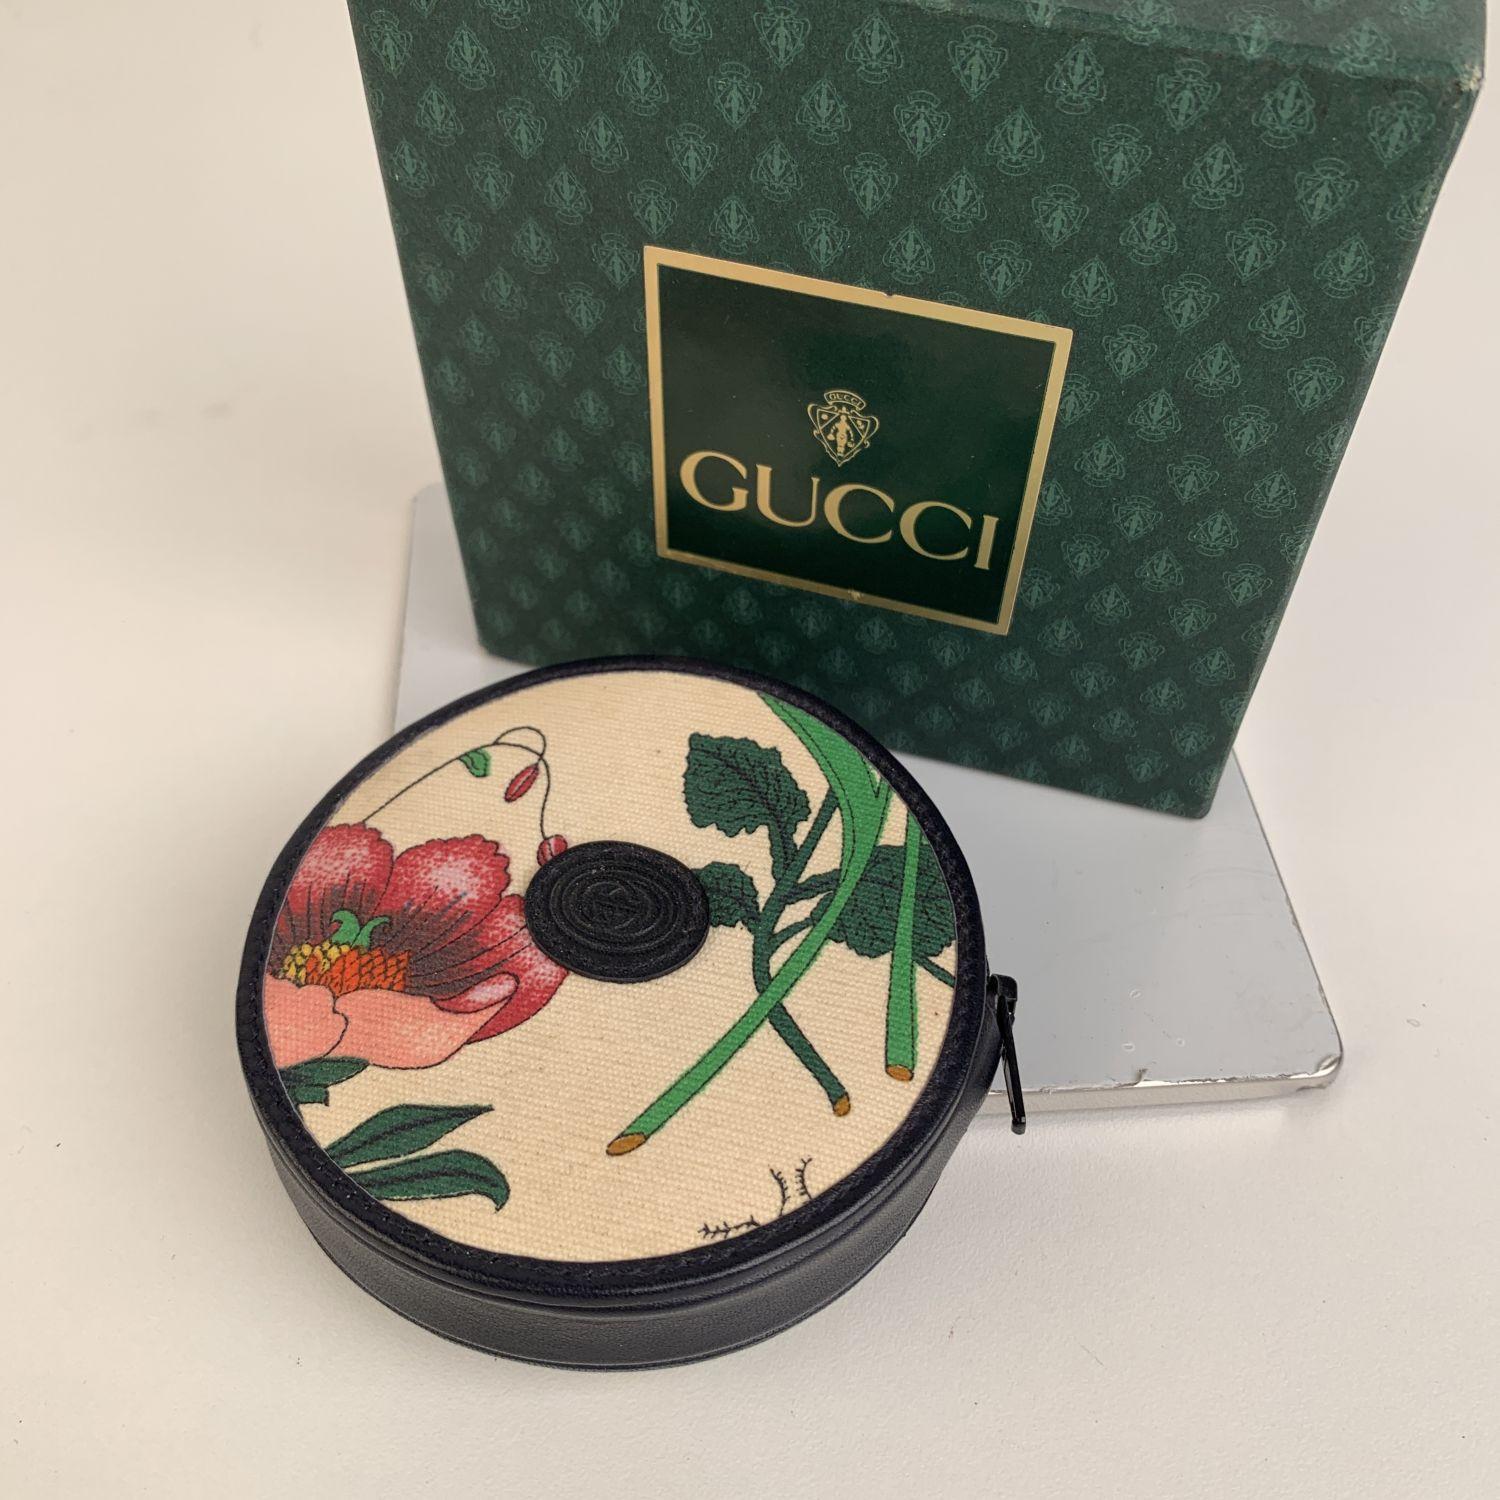 Vintage Gucci round coin purse crafted in Flora canvas with blue genuine leather trim. Zip closure. GG - GUCCI logo patch on the front. 'Gucci - Made in Italy' embossed inside. Gucci box is included.




MATERIAL: Canvas

COLOR: Blue

MODEL: Coin